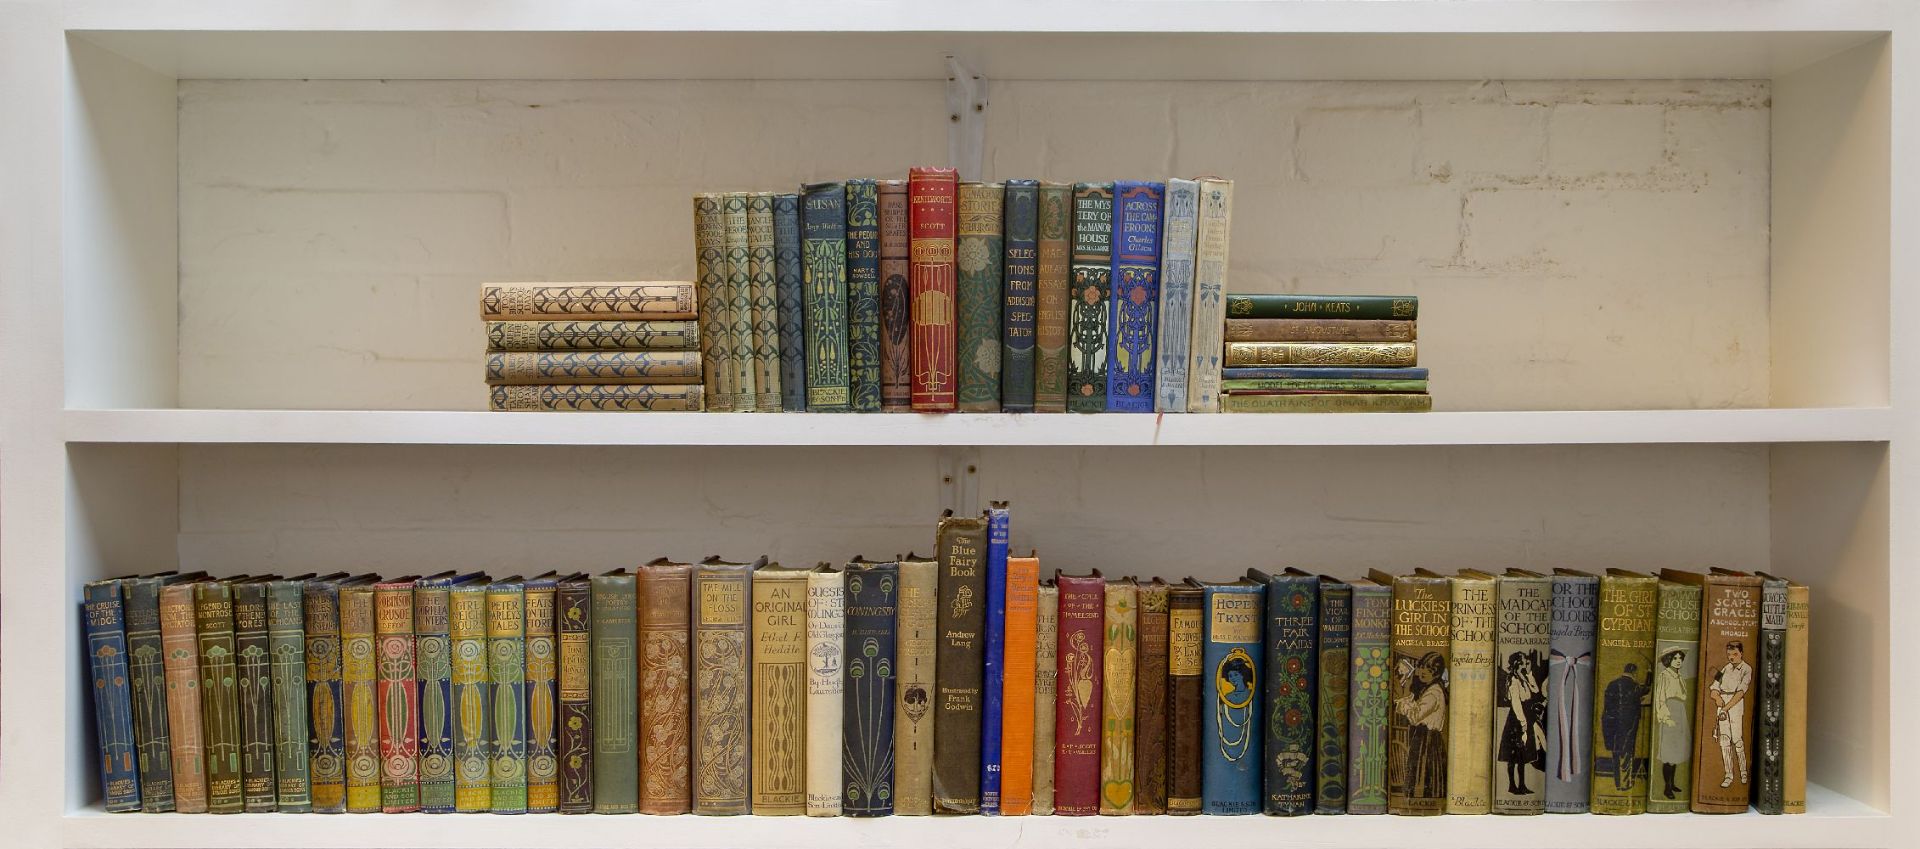 Blackie and Son Ltd, a quantity of books with decorative covers, some in the ‘Glasgow school’